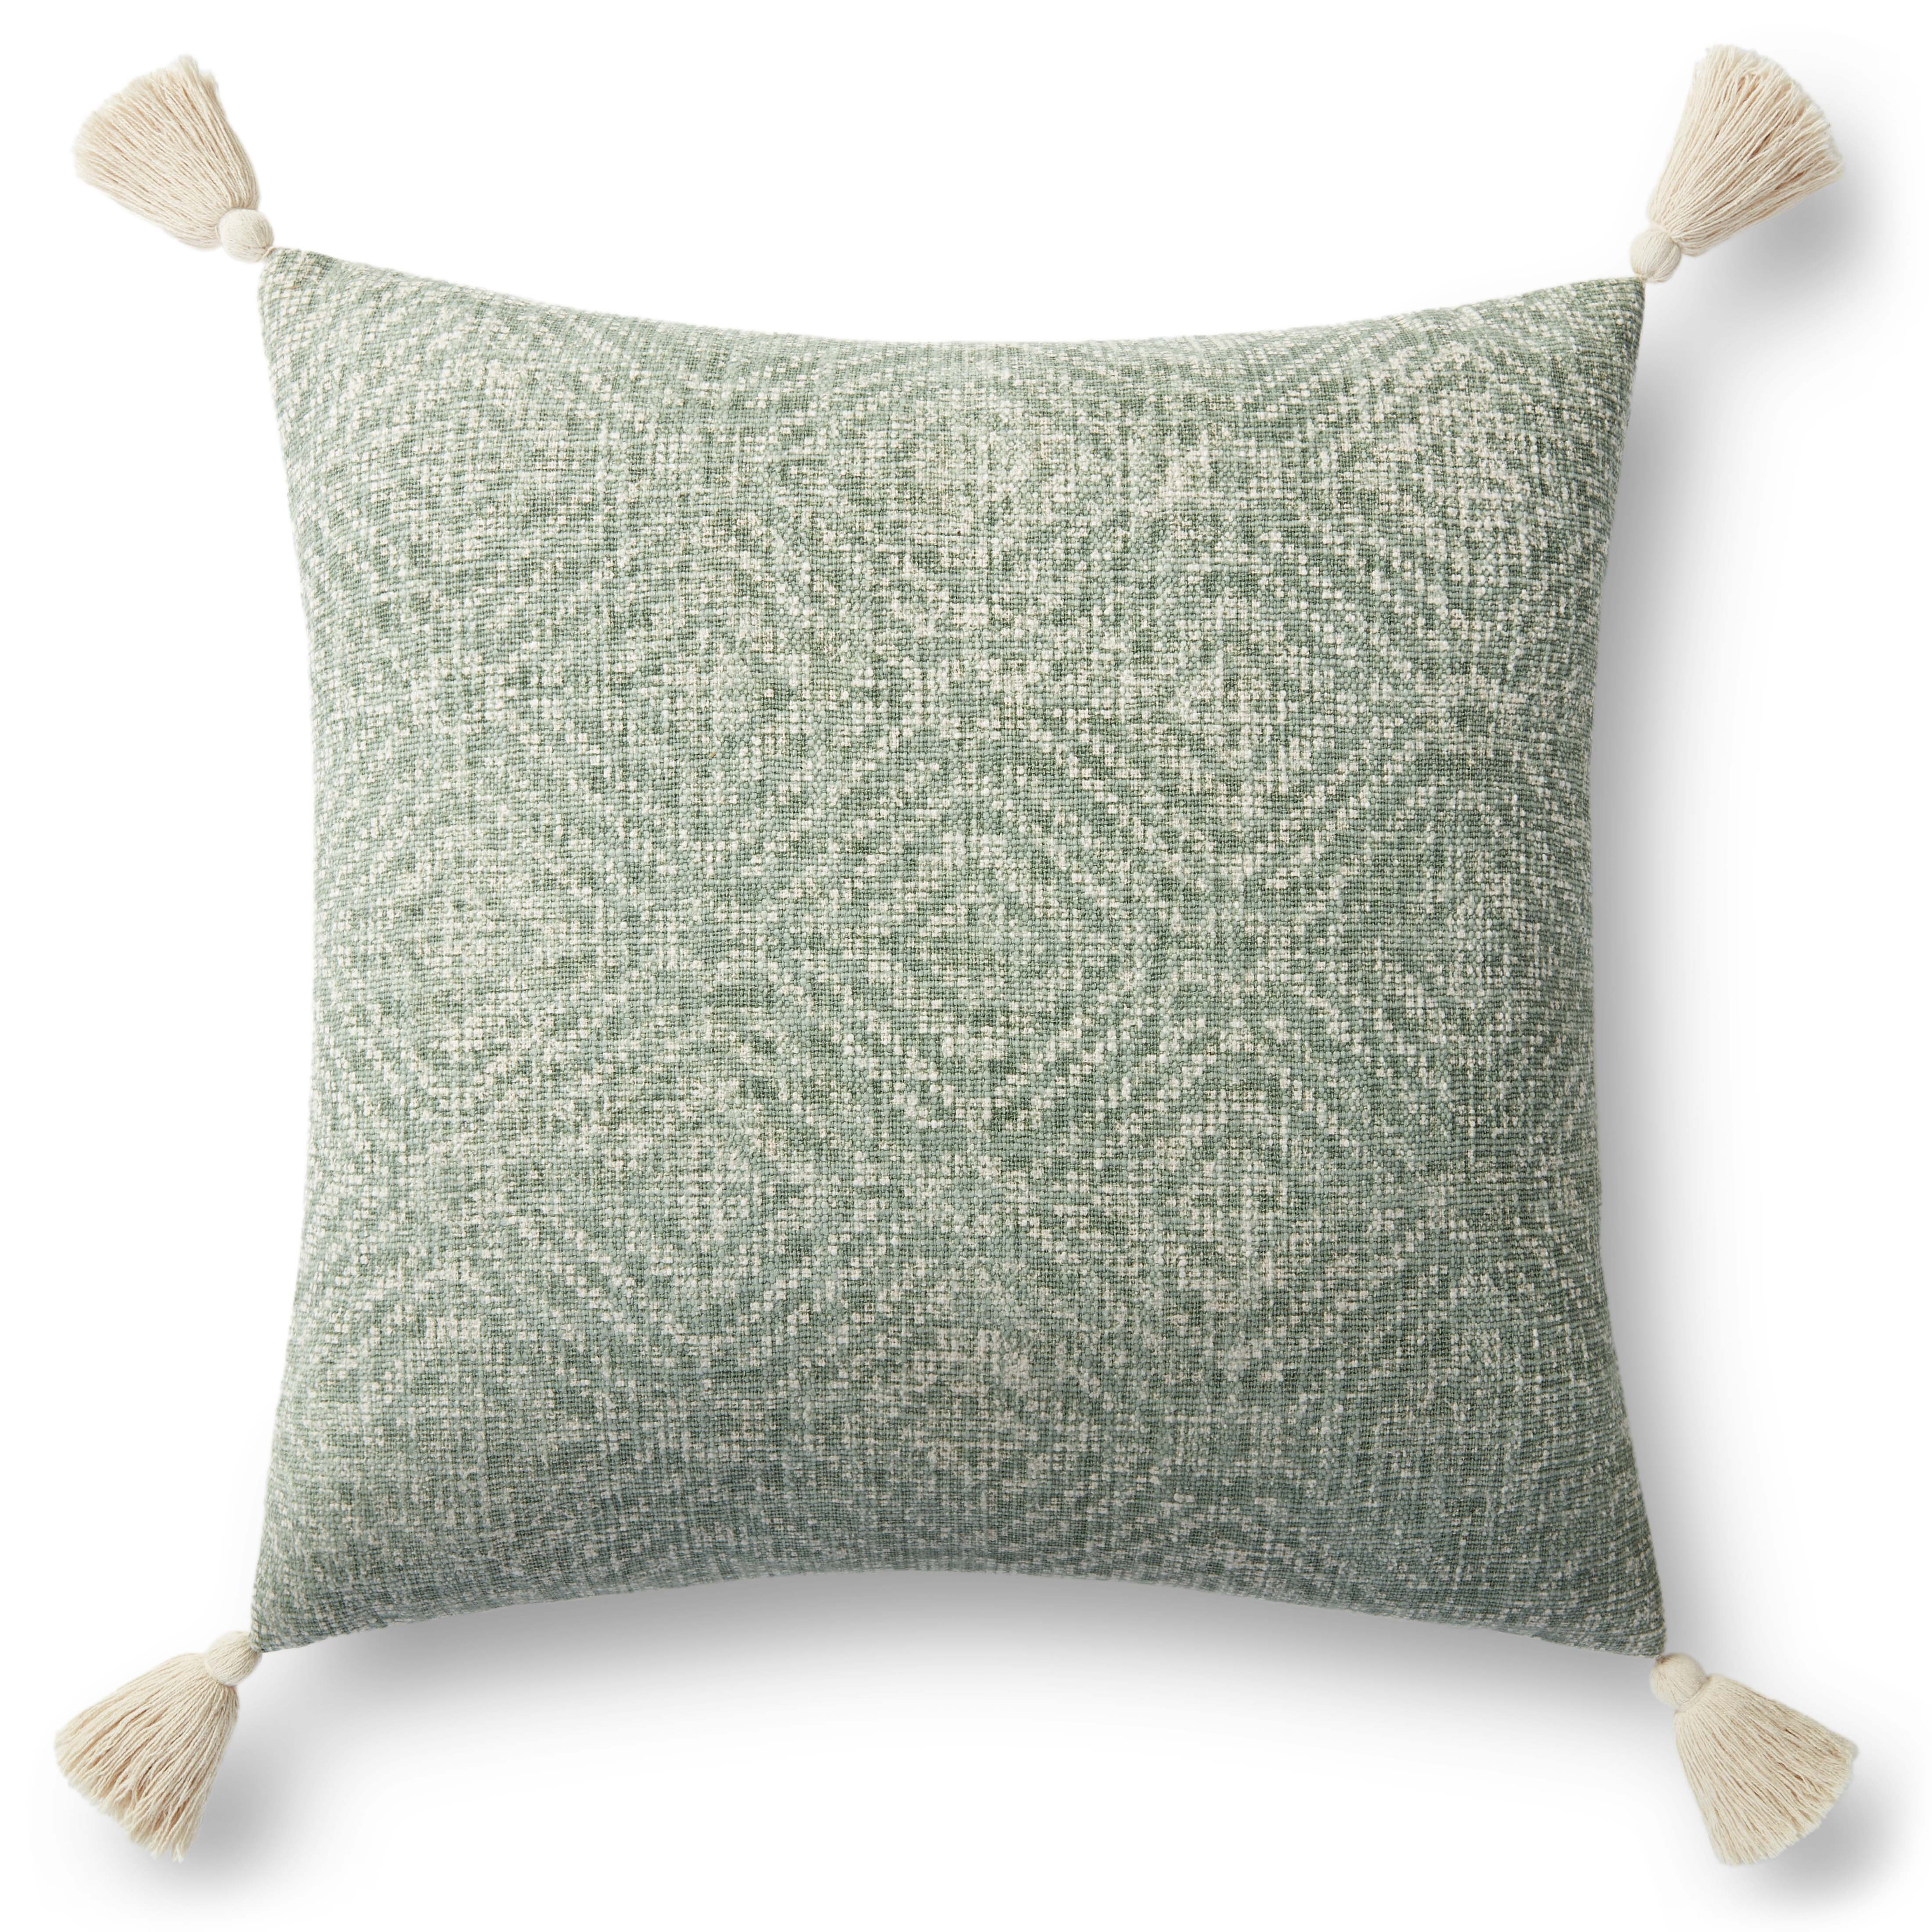 Loloi Pillows P0621 Green 22" x 22" Cover w/Poly - Loloi Rugs